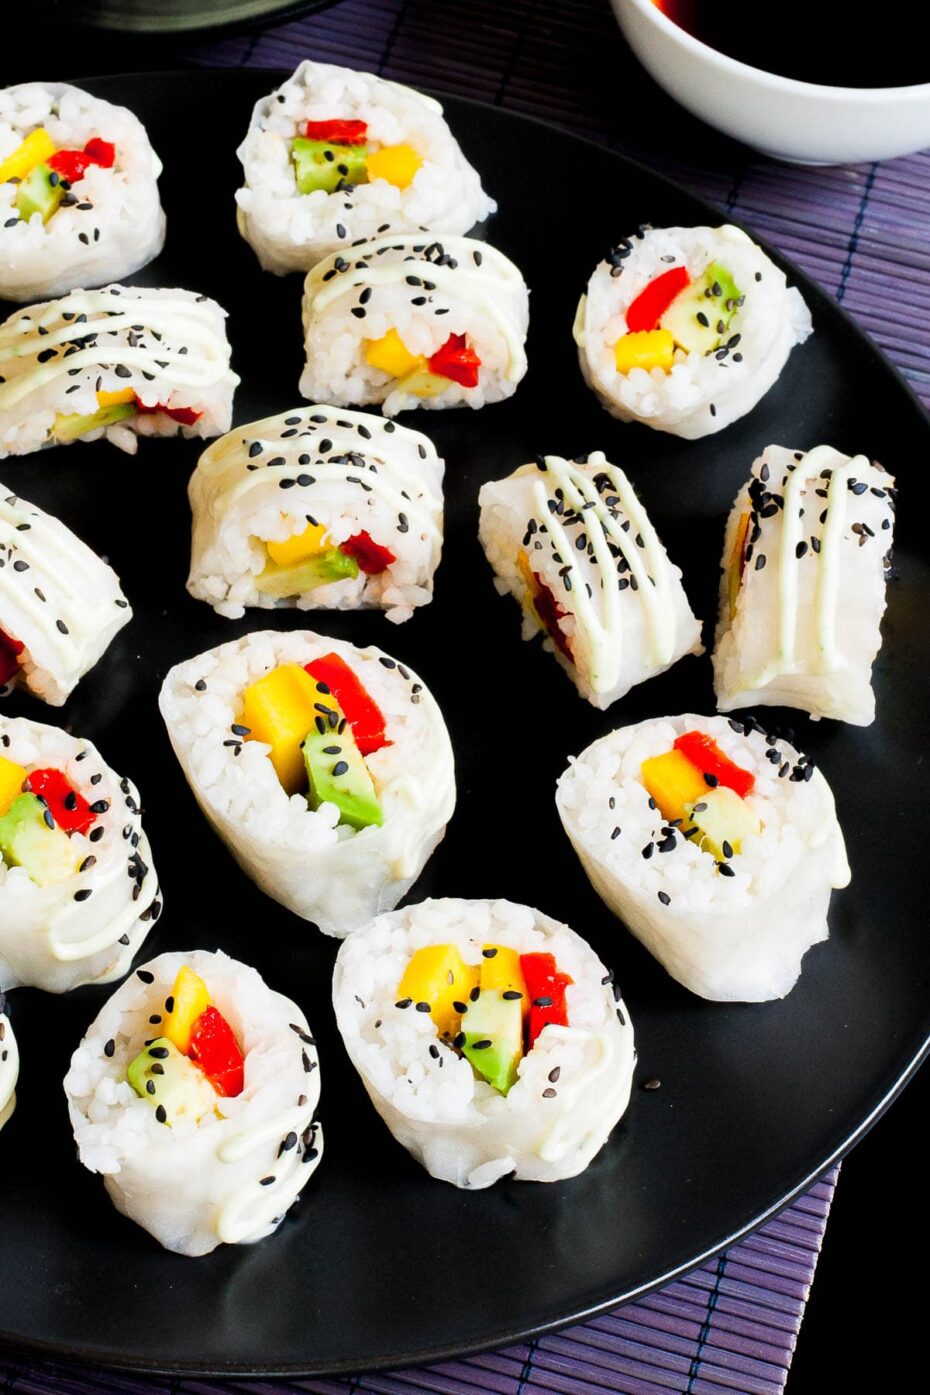 Large black round plate with a lot of white sushi rolls with colorful filling sprinkled with tiny black sesame seeds. 